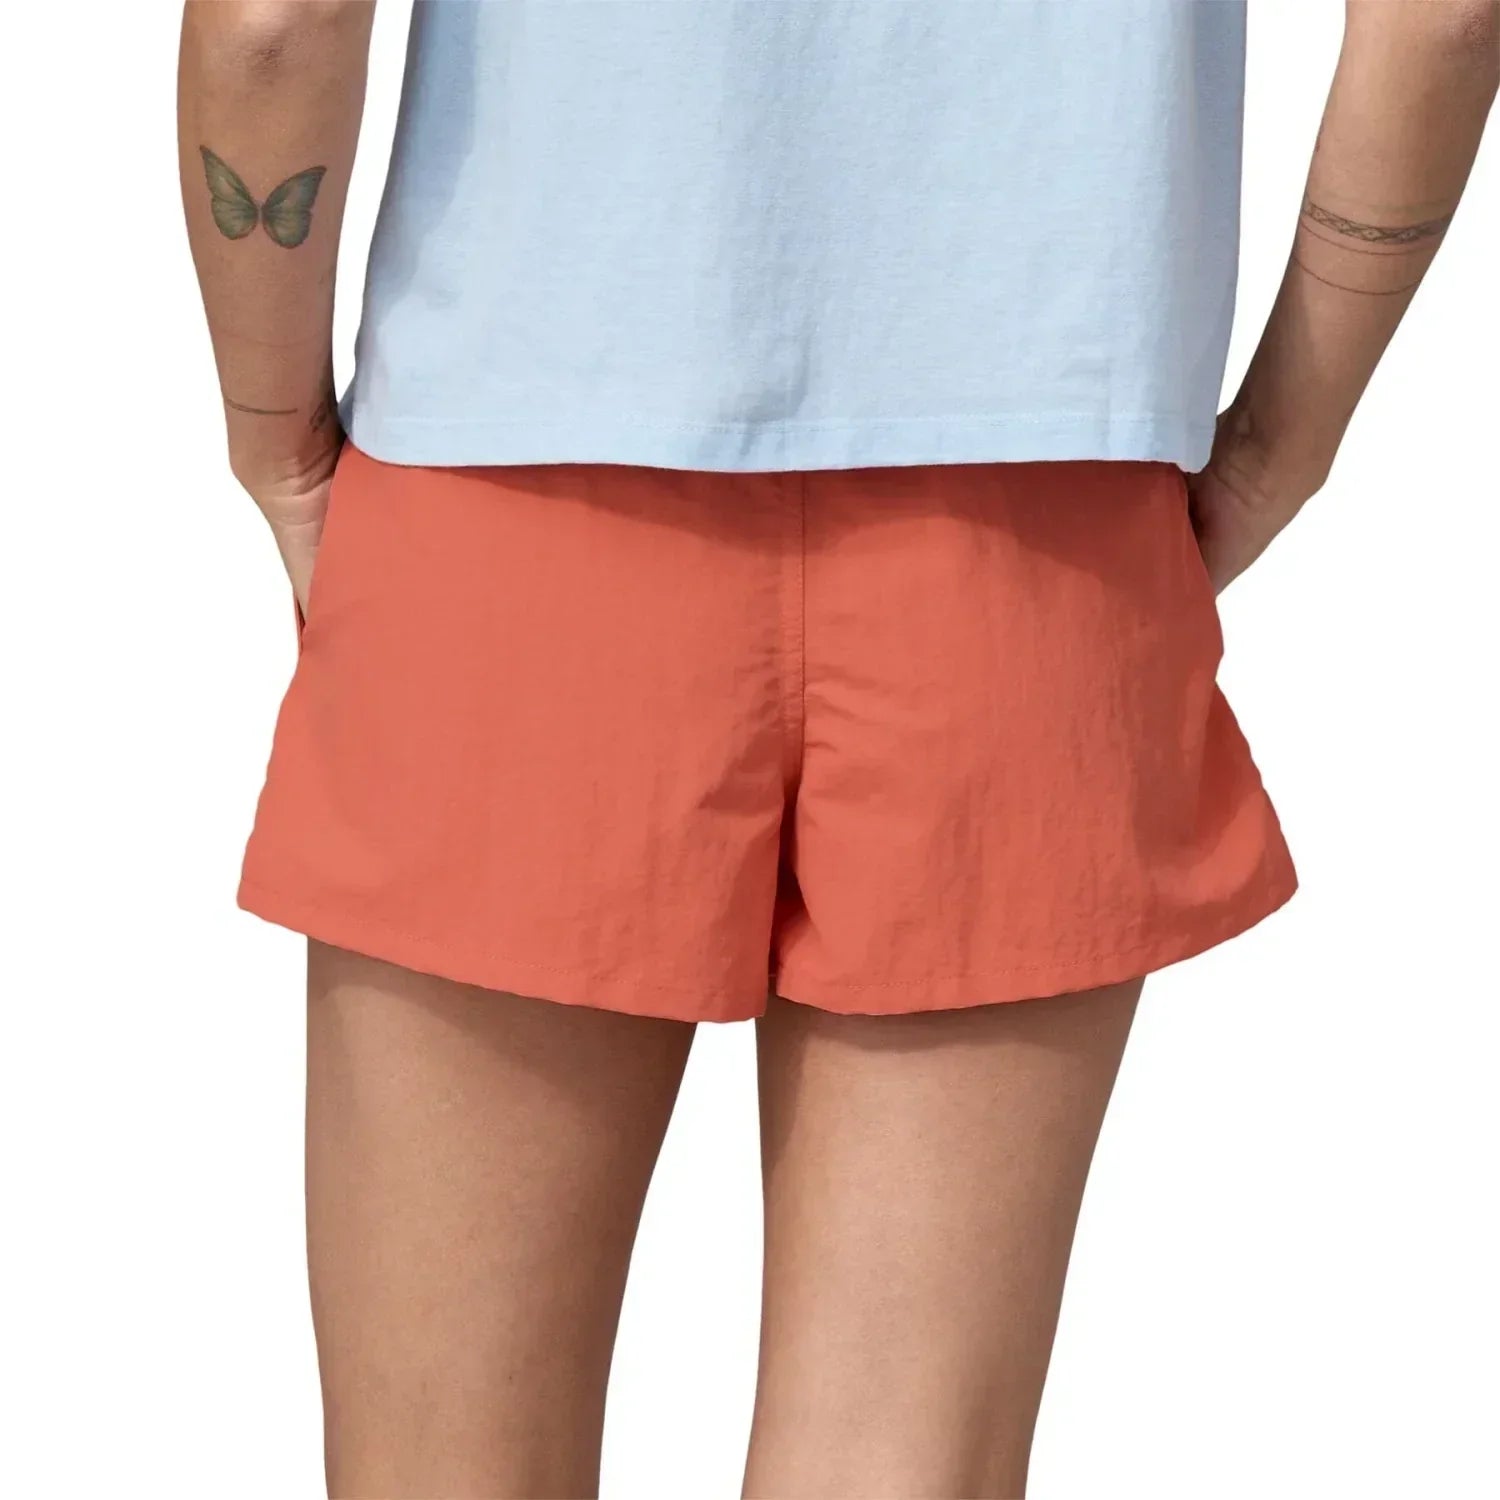 Patagonia 02. WOMENS APPAREL - WOMENS SHORTS - WOMENS SHORTS ACTIVE Women's Barely Baggies Shorts - 2 1/2 in COHC COHO CORAL